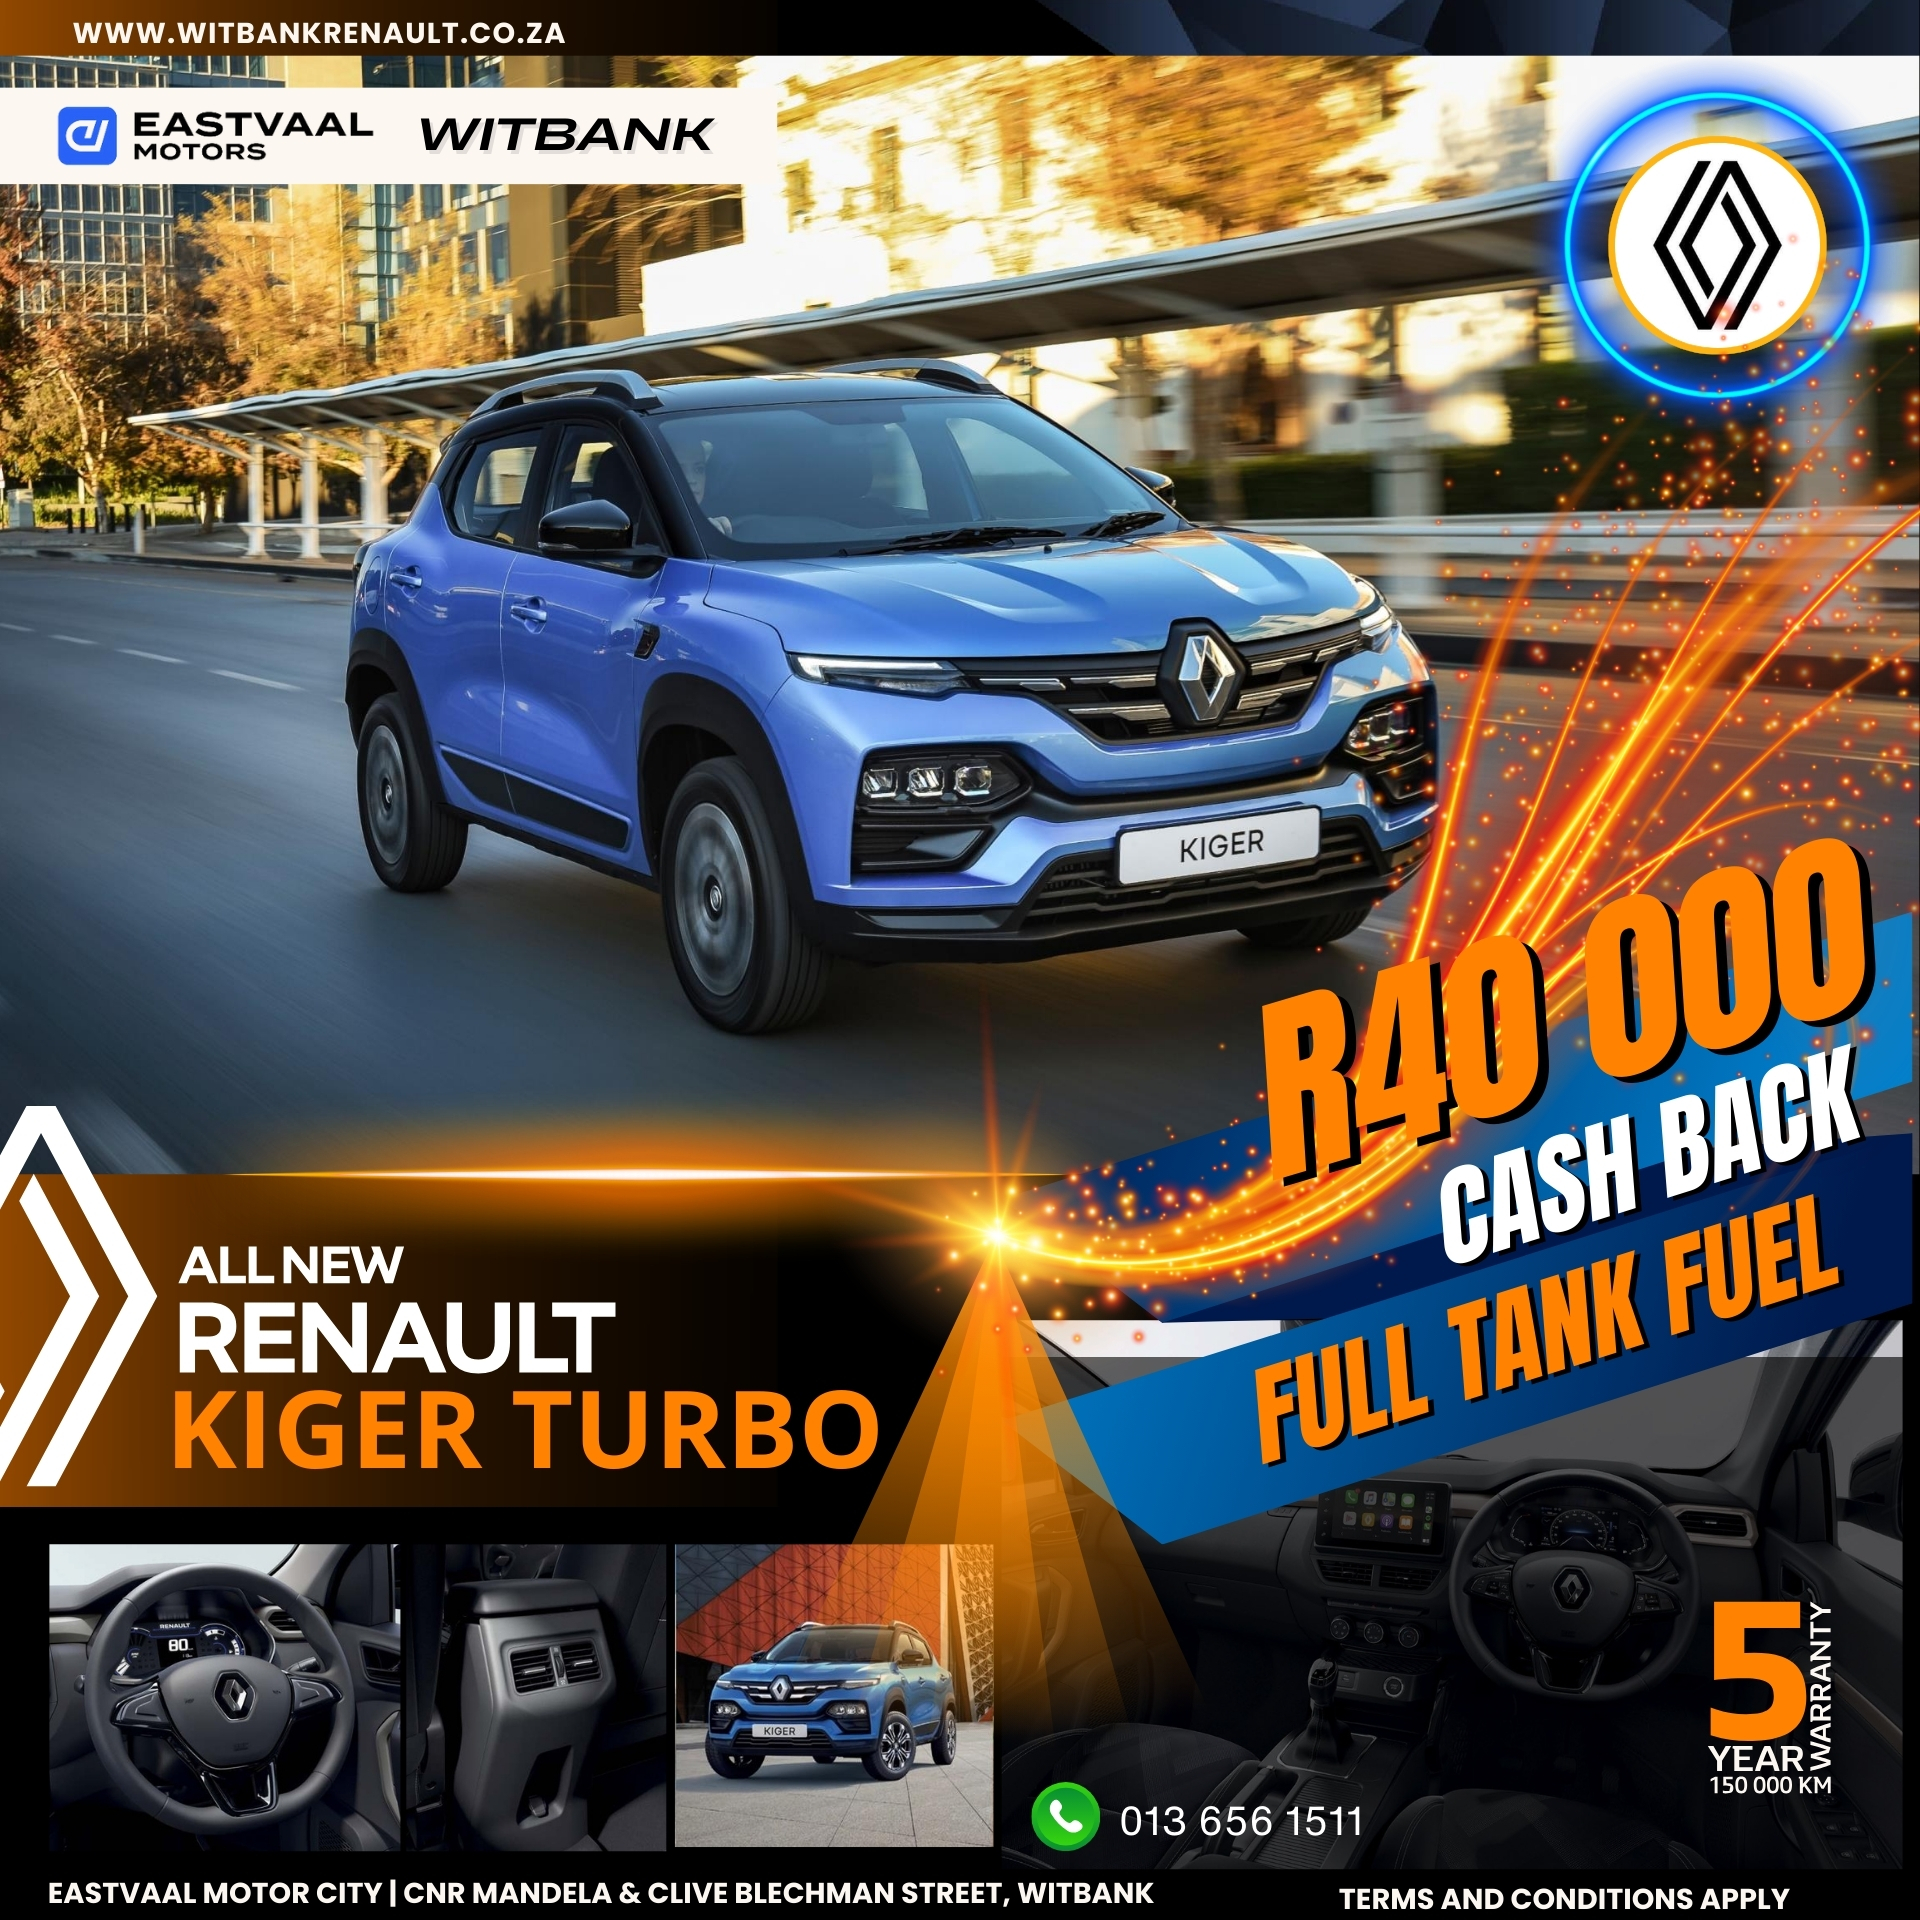 Renault Kiger Turbo image from 